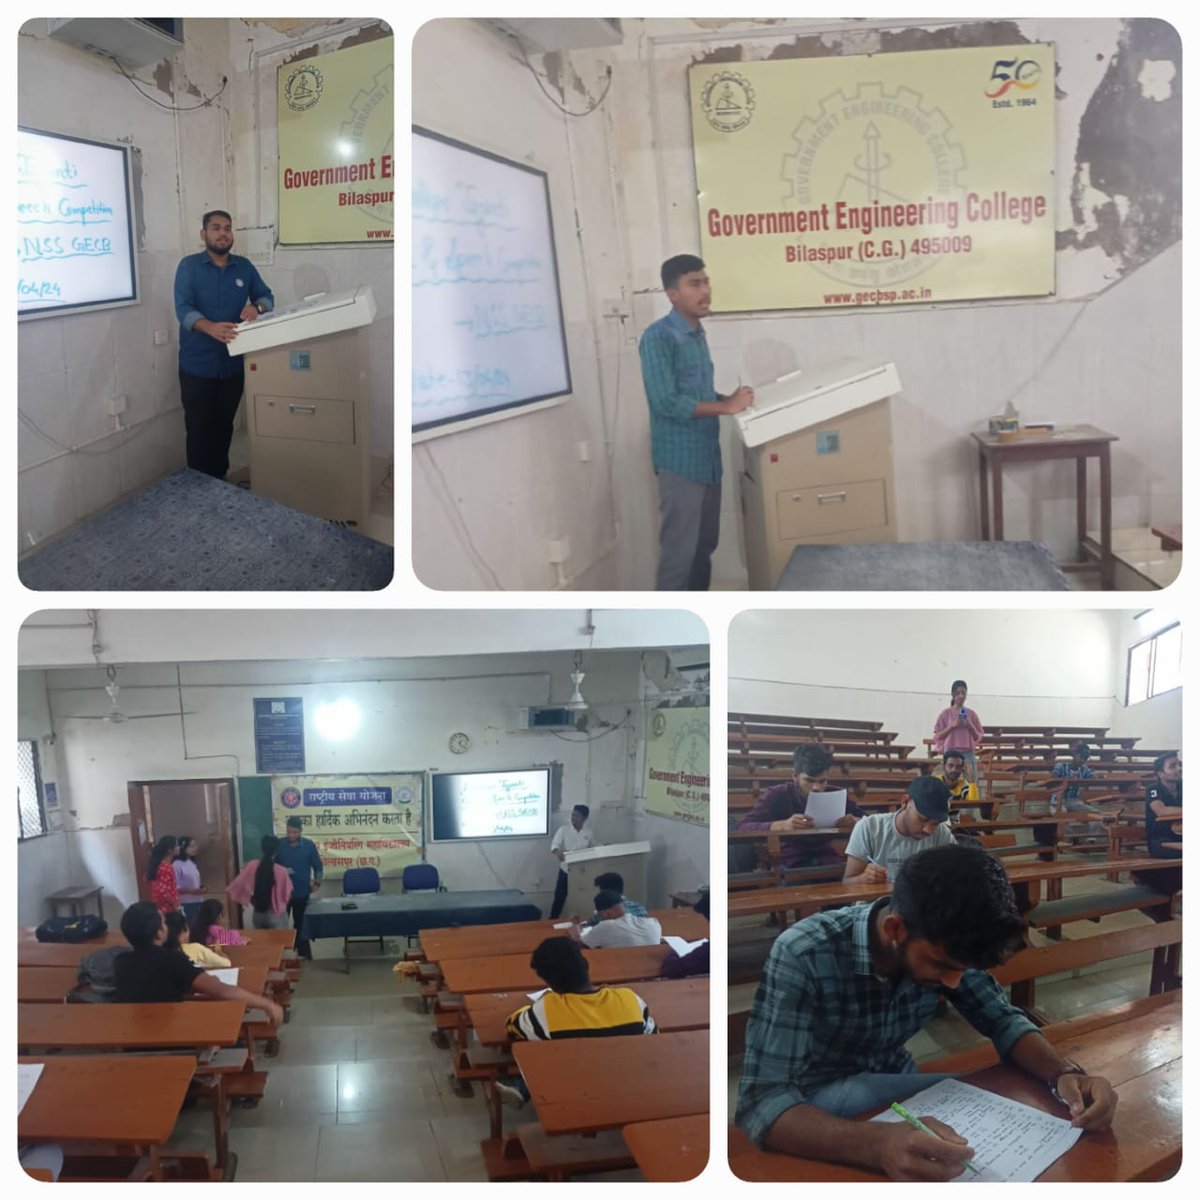 जय हिंद🇮🇳
13 अप्रैल 2024, 

Today, on the occasion of  #AmbedkarJayanti2024 , a quiz and speech competition were organized at the Government Engineering College, Bilaspur.'